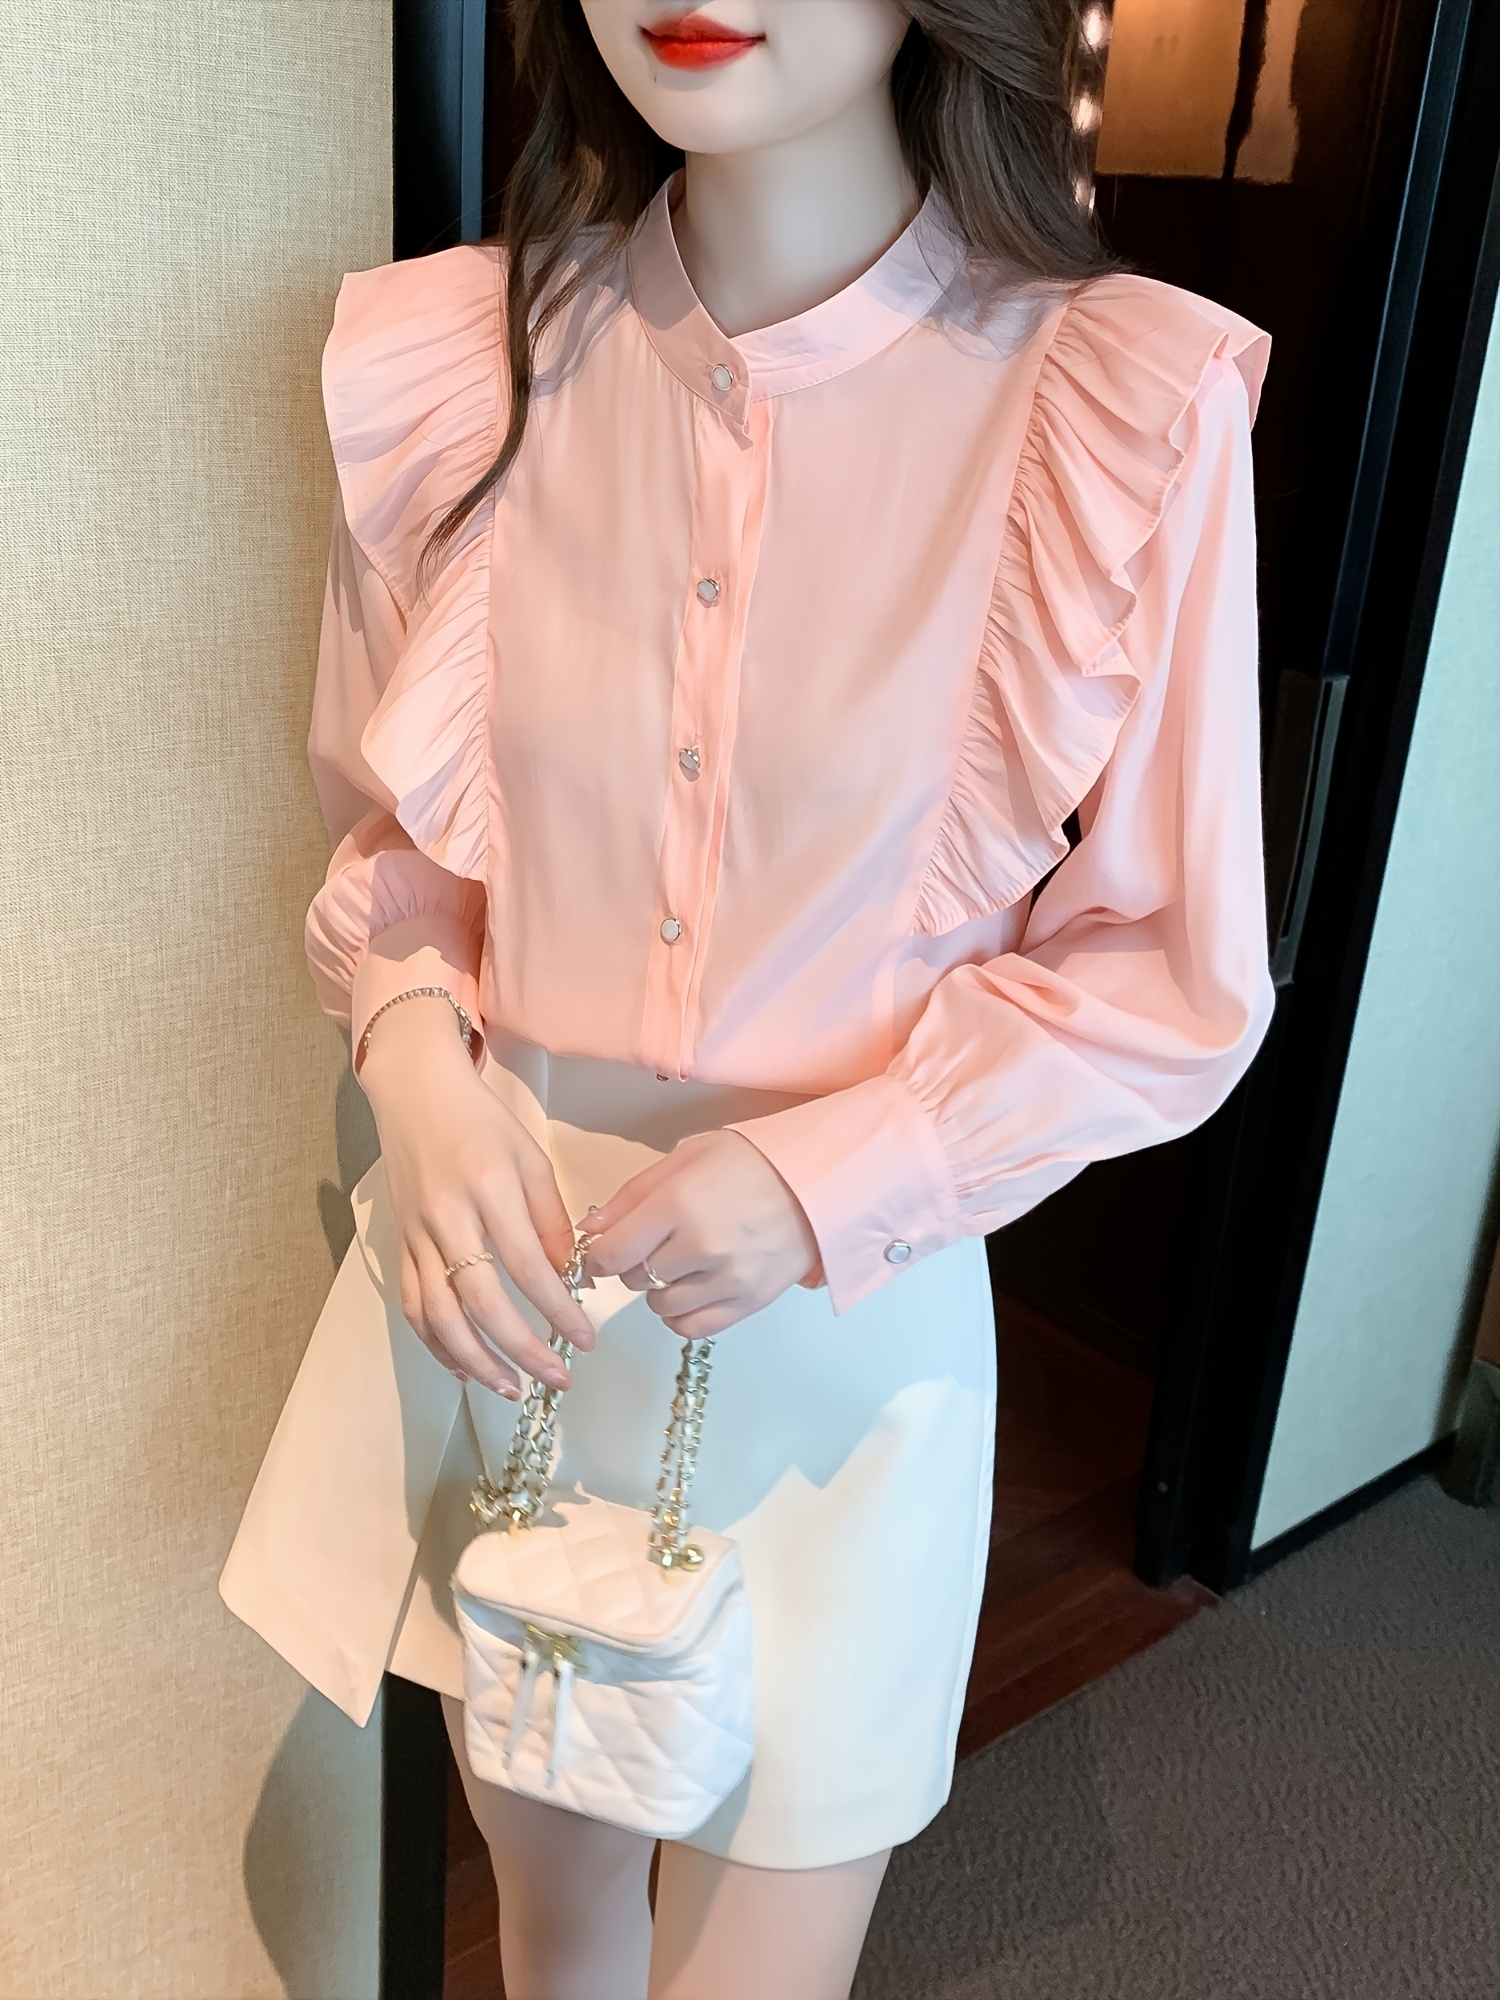 Women's Long Sleeve Shirt Tops Bow Tie Front Frilly Ruffle Solid Chiffon  Blouse